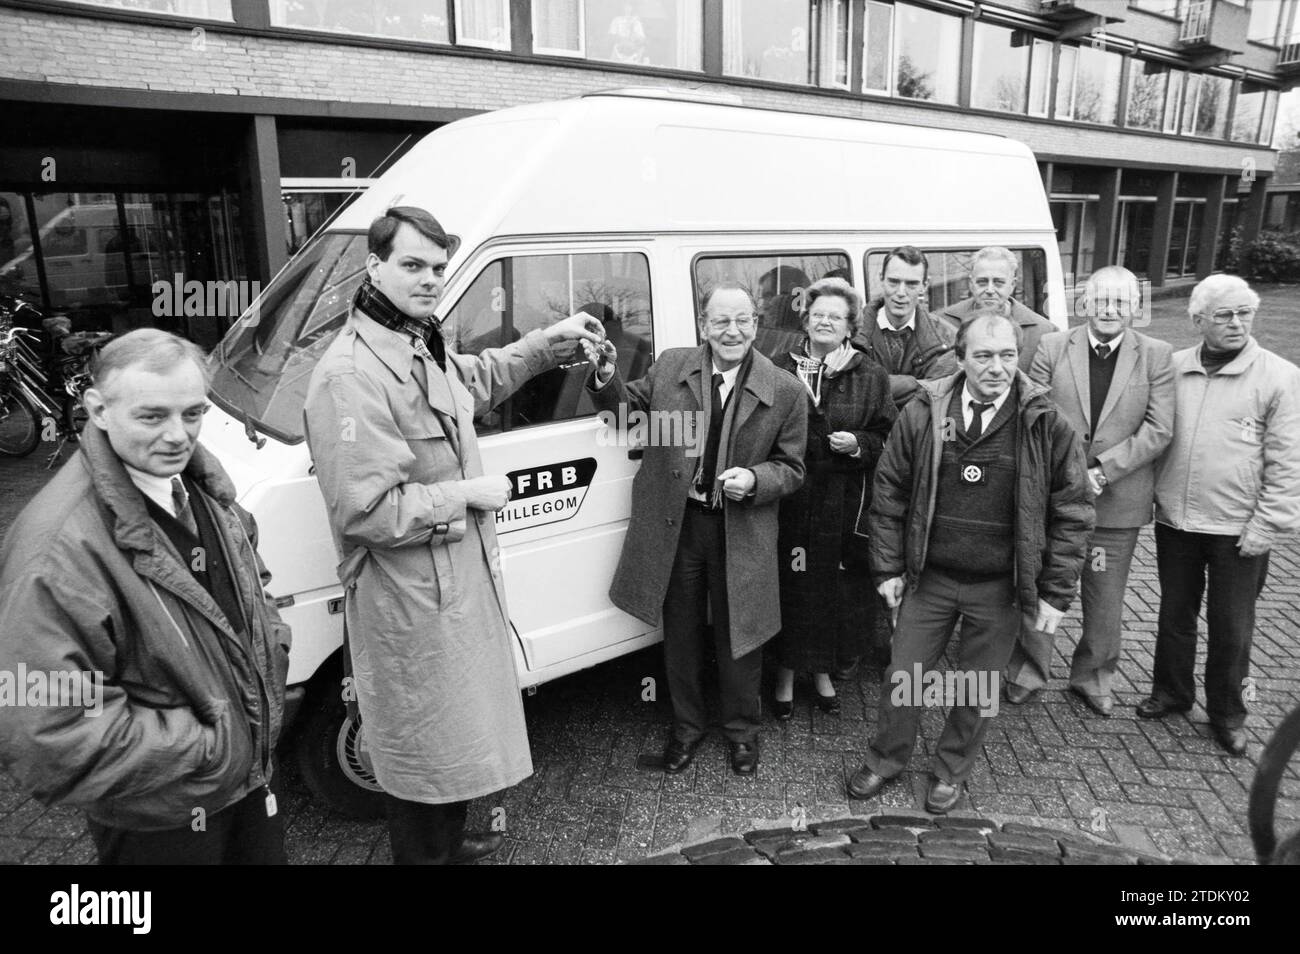 Transfer of van from FRB Hillegom, Hillegom, 15-12-1988, Whizgle News from the Past, Tailored for the Future. Explore historical narratives, Dutch The Netherlands agency image with a modern perspective, bridging the gap between yesterday's events and tomorrow's insights. A timeless journey shaping the stories that shape our future Stock Photo